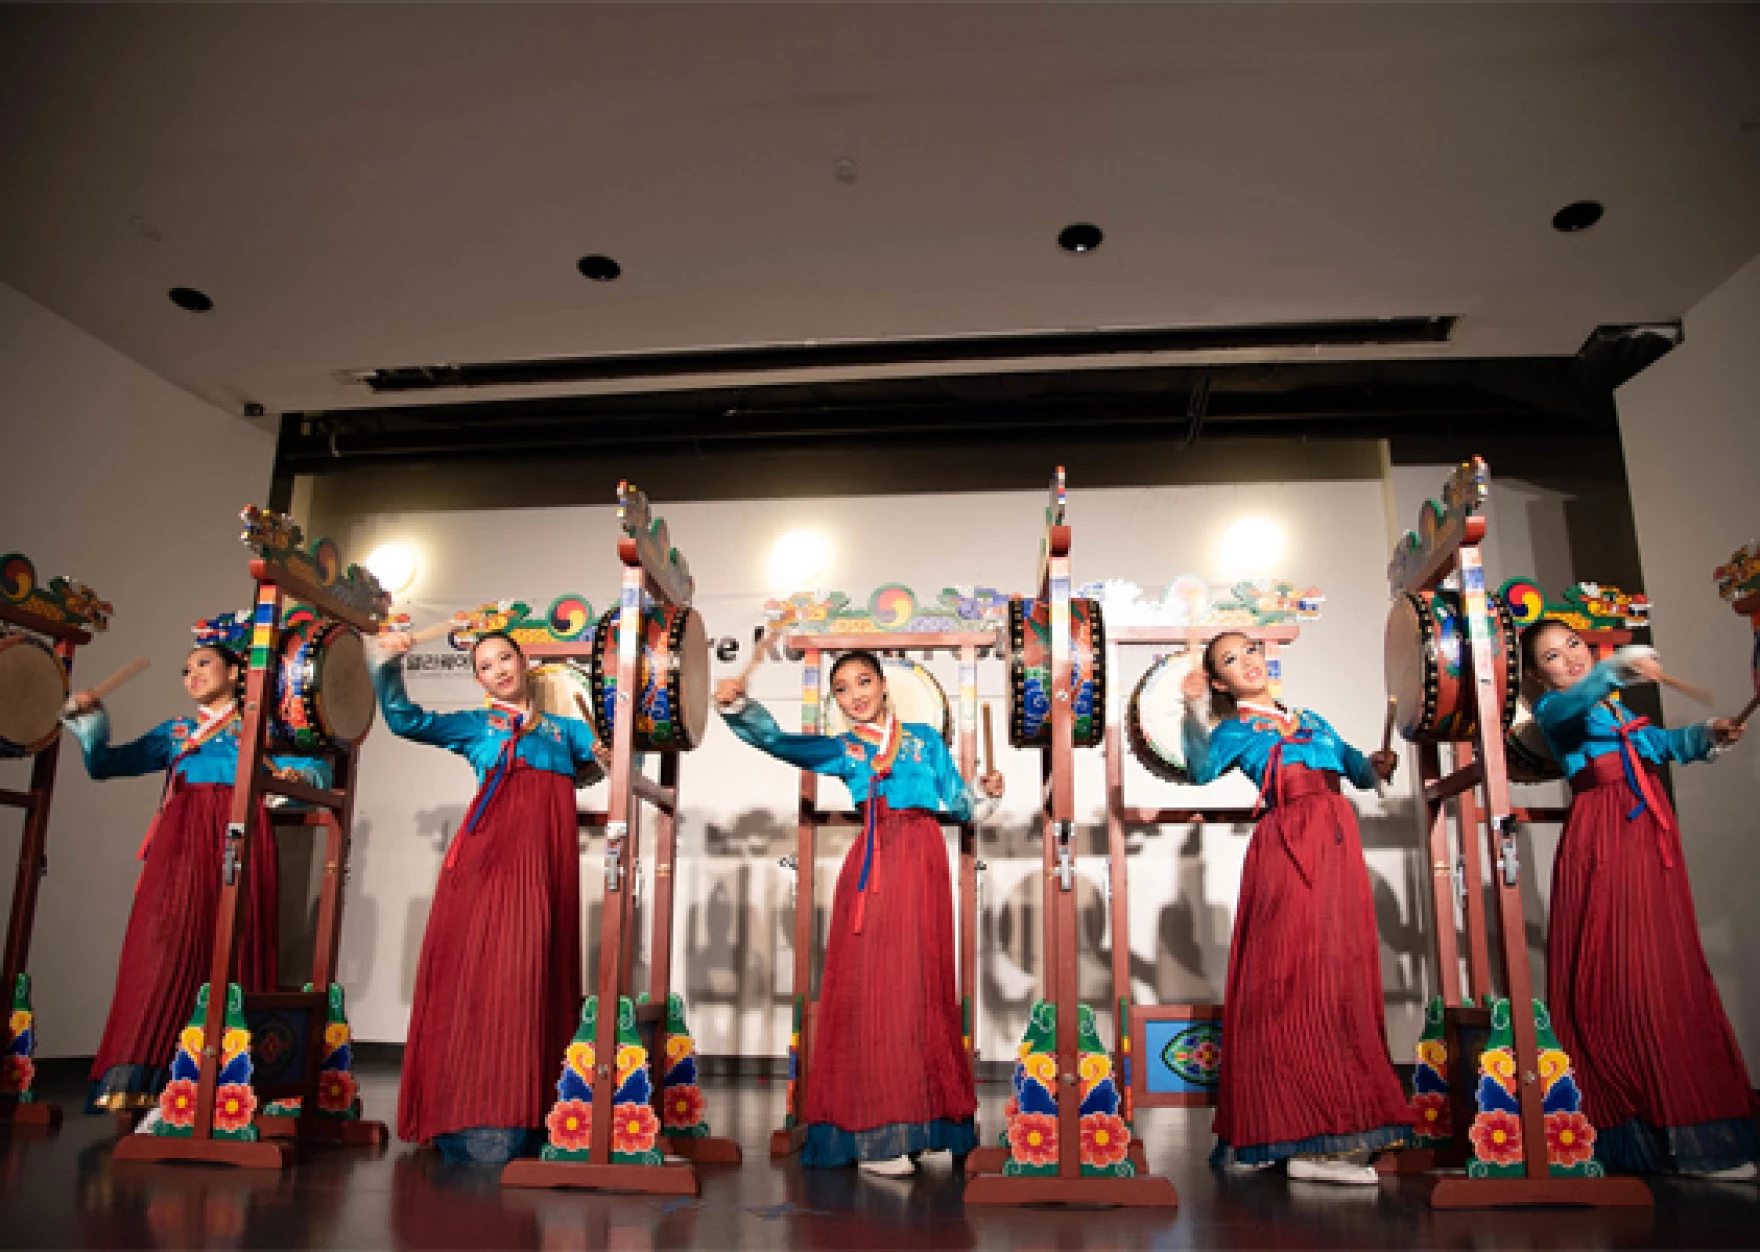 The Delaware Art Museum’s Korean Festival blends the traditional and contemporary